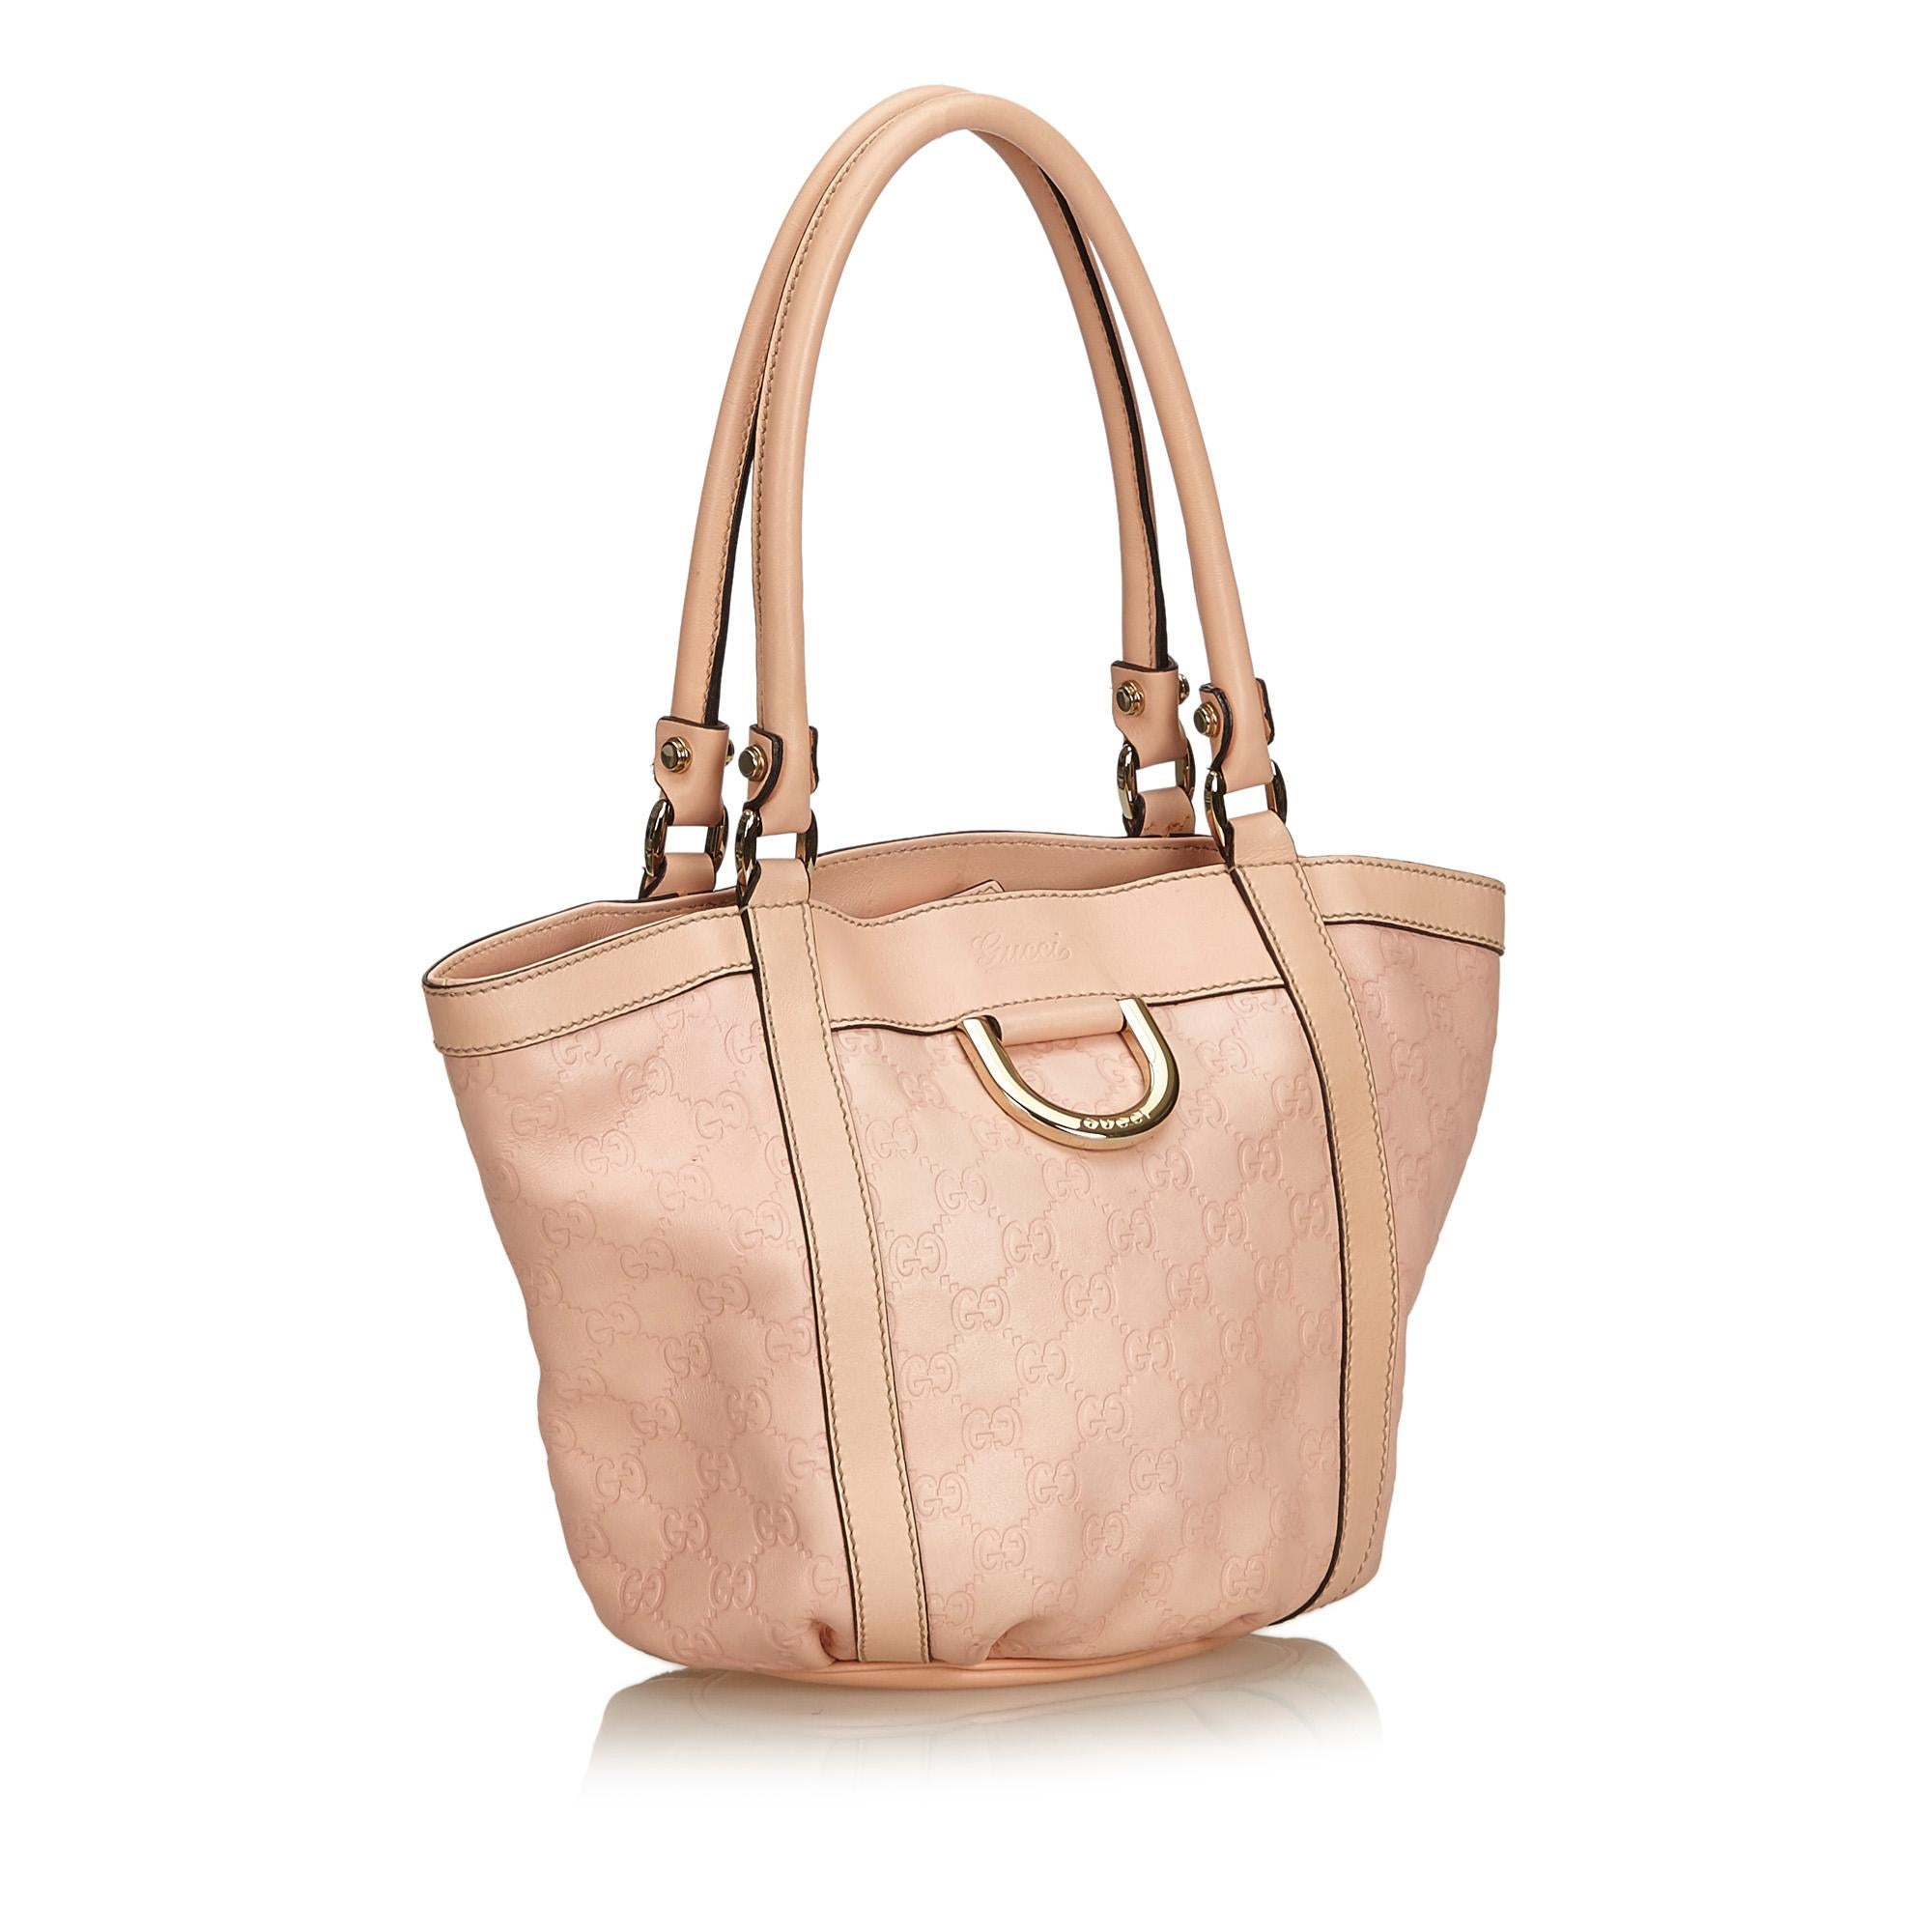 This tote bag features a leather body, rolled leather handles, open top, and interior zip and slip pockets.

It carries a B+ condition rating.

Dimensions: 
Length 25.00 cm
Width 34.00 cm
Depth 9.00 cm
Shoulder Drop 19.00 cm

Inclusions: No longer